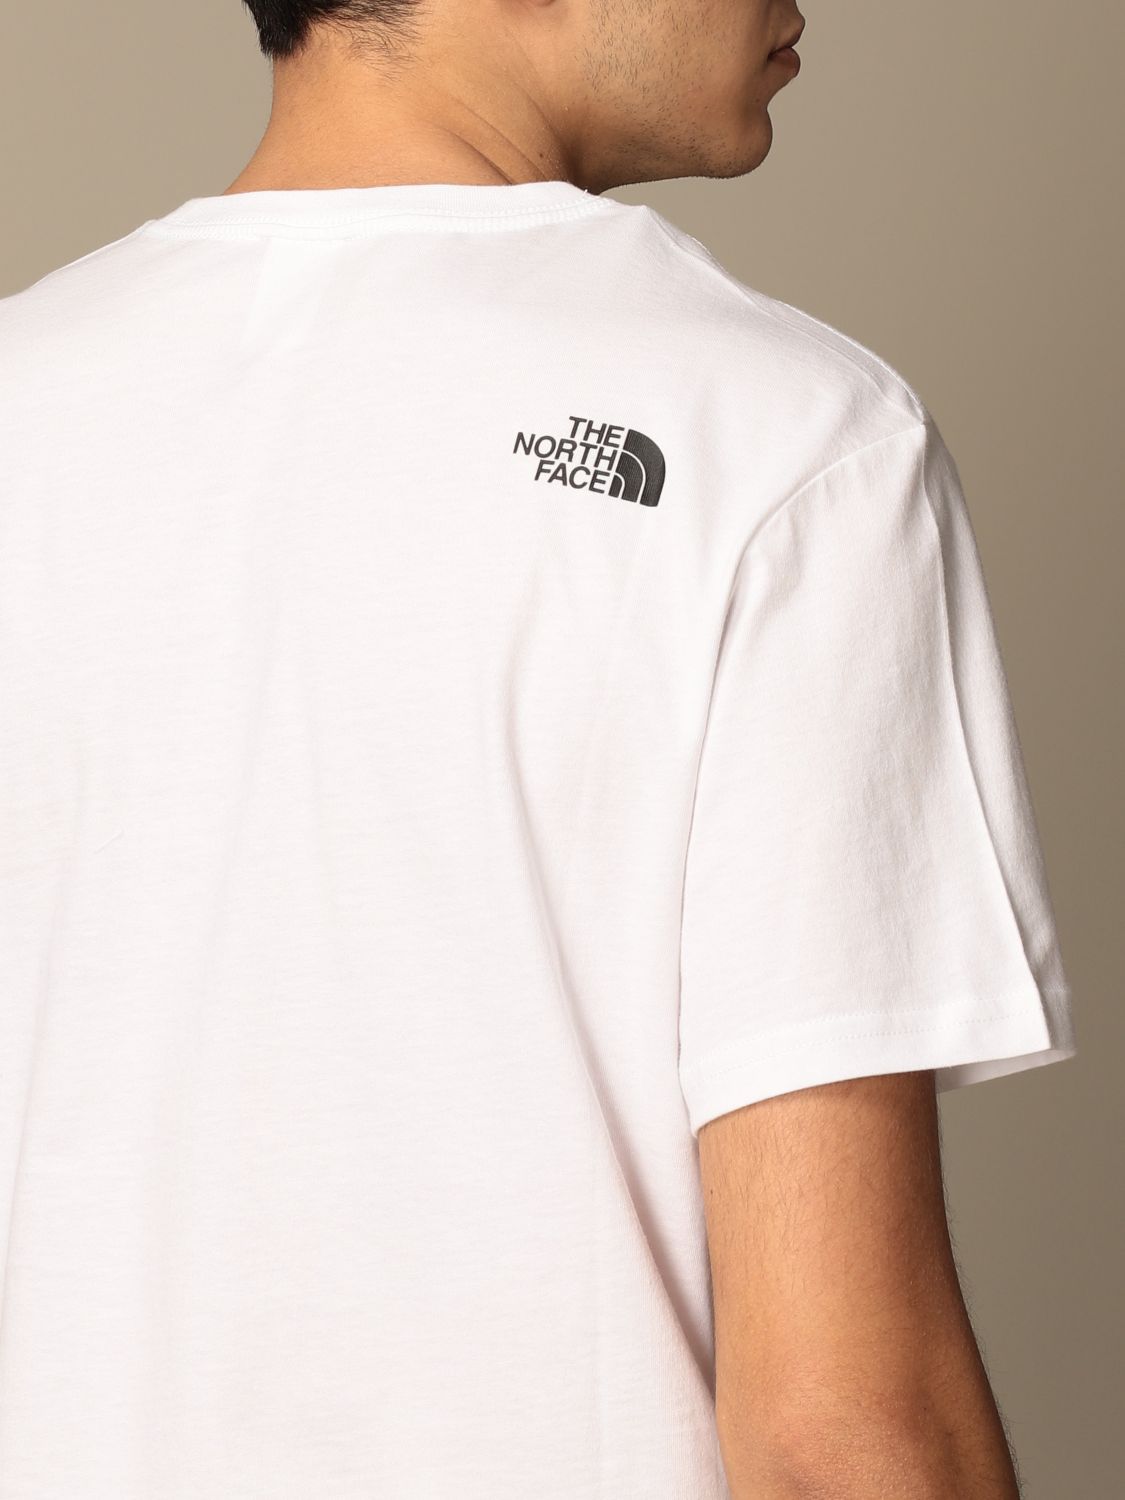 the north face white t shirt